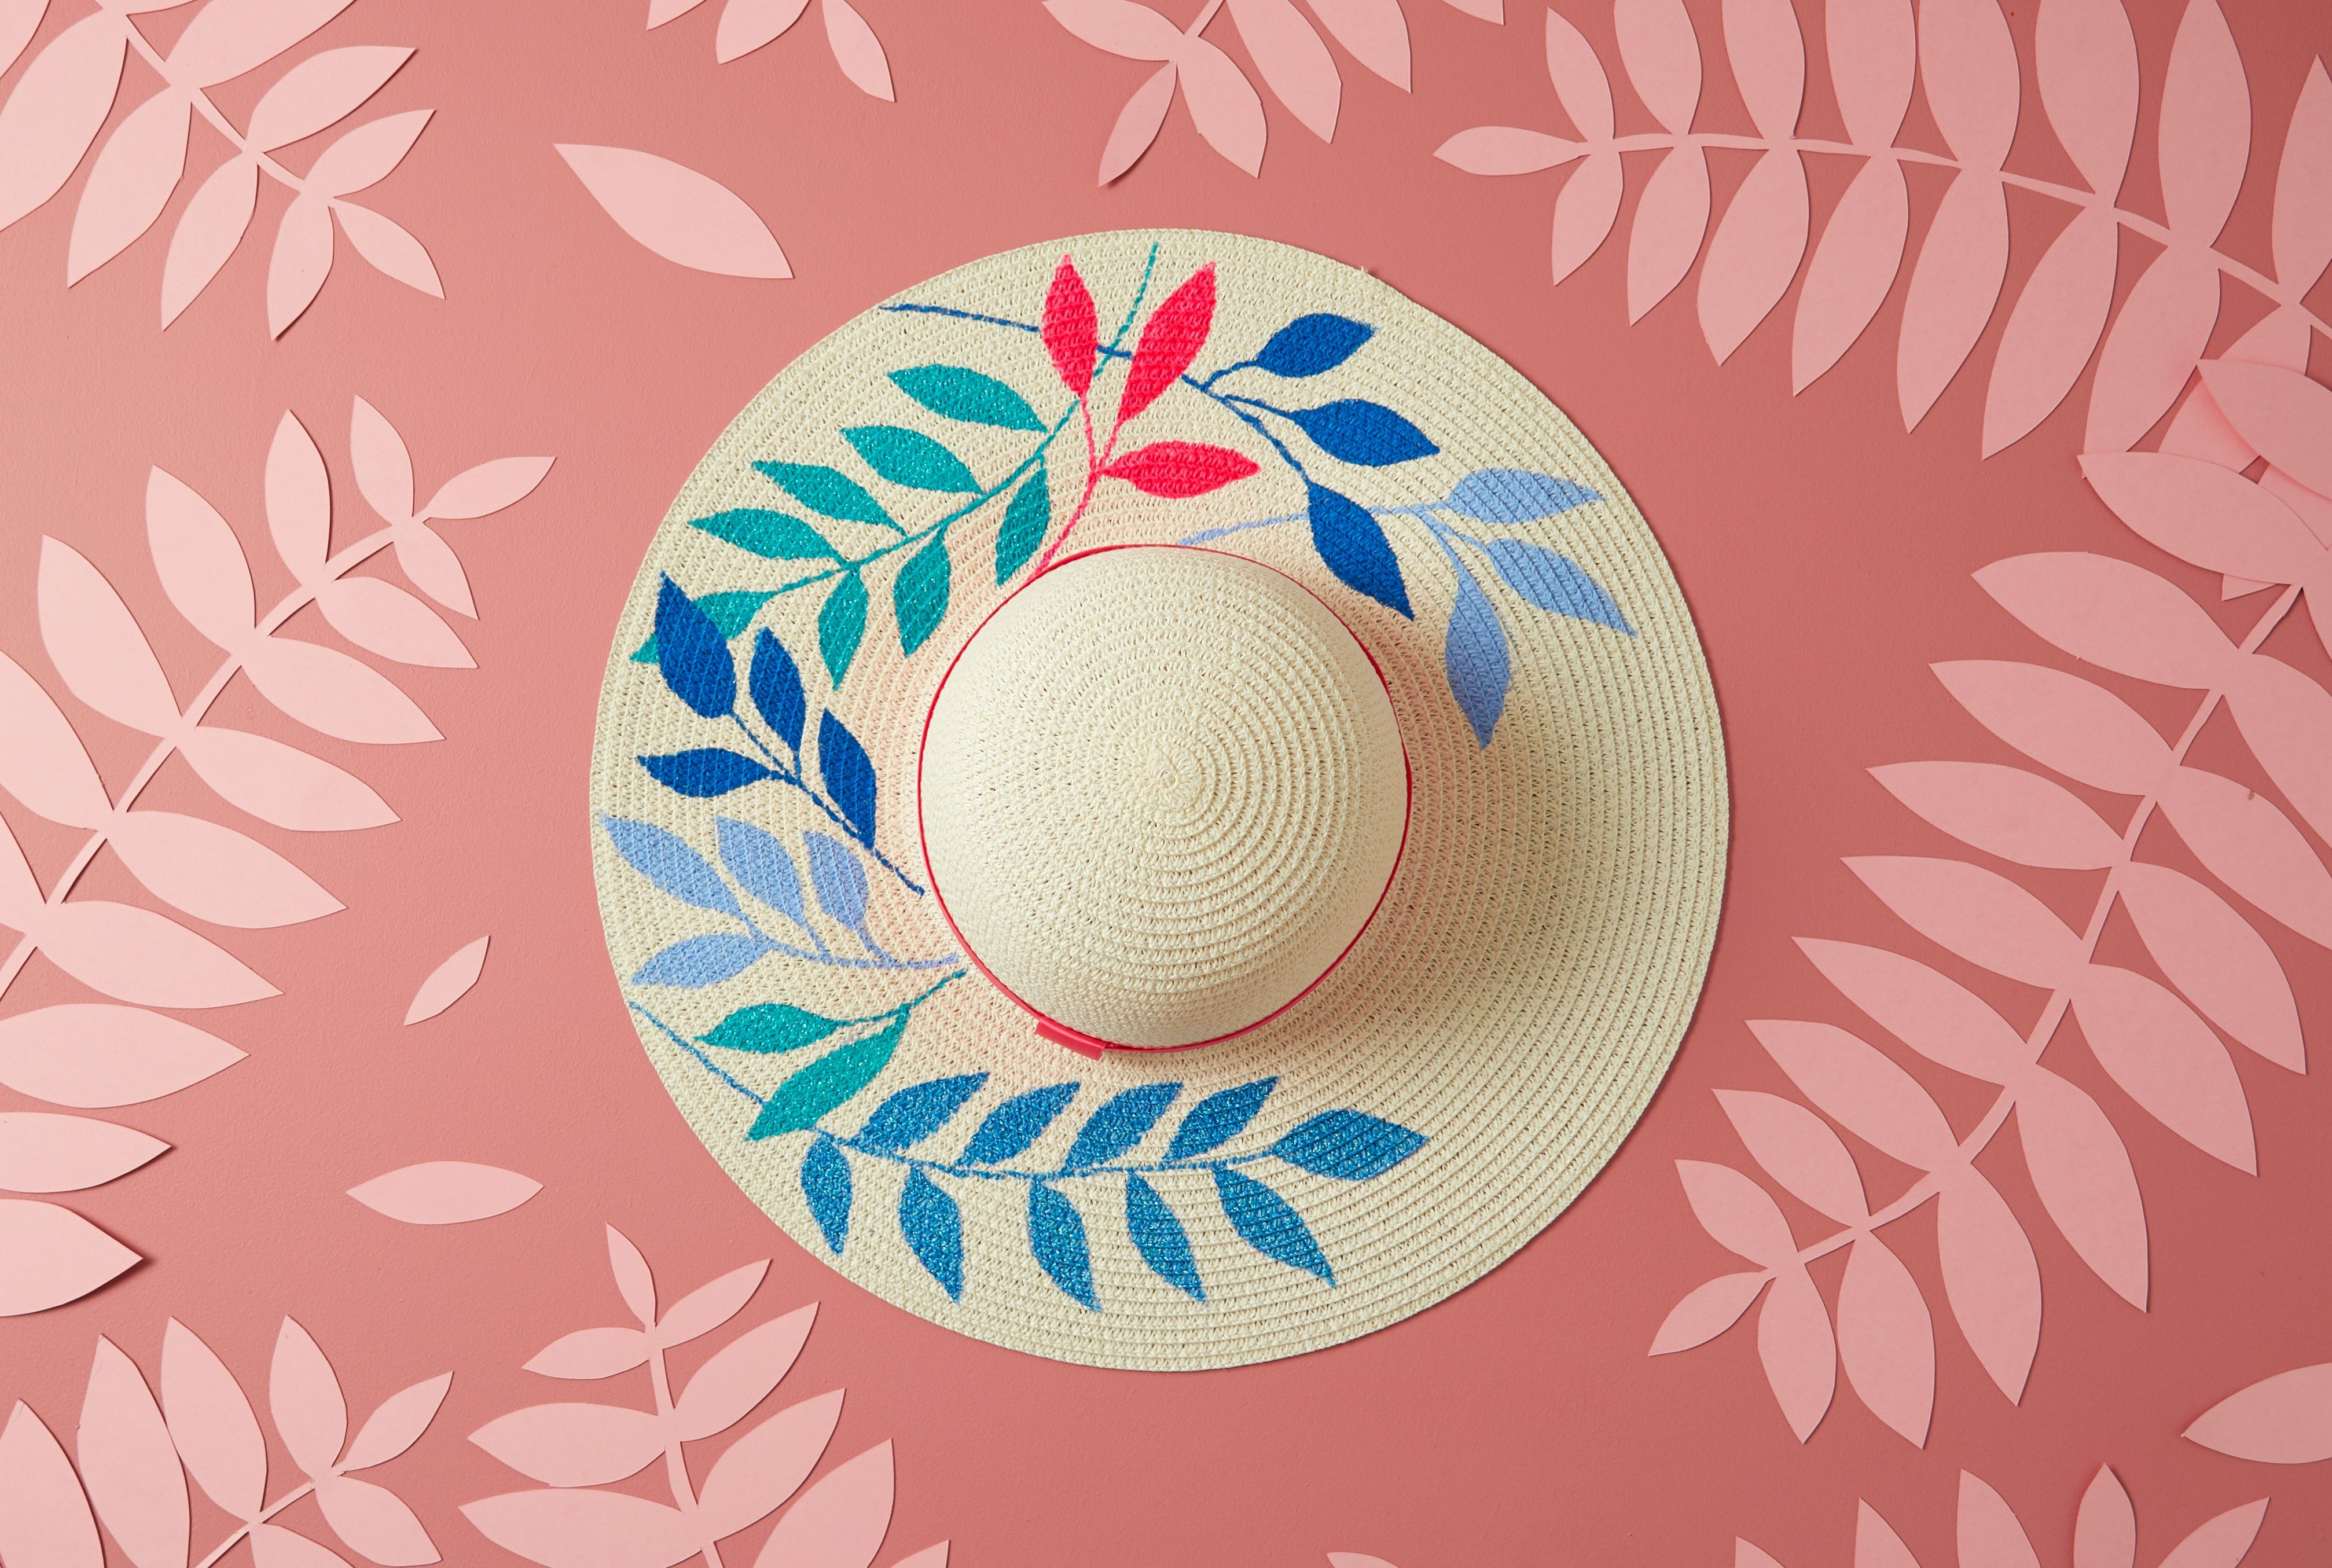 Painted straw hat